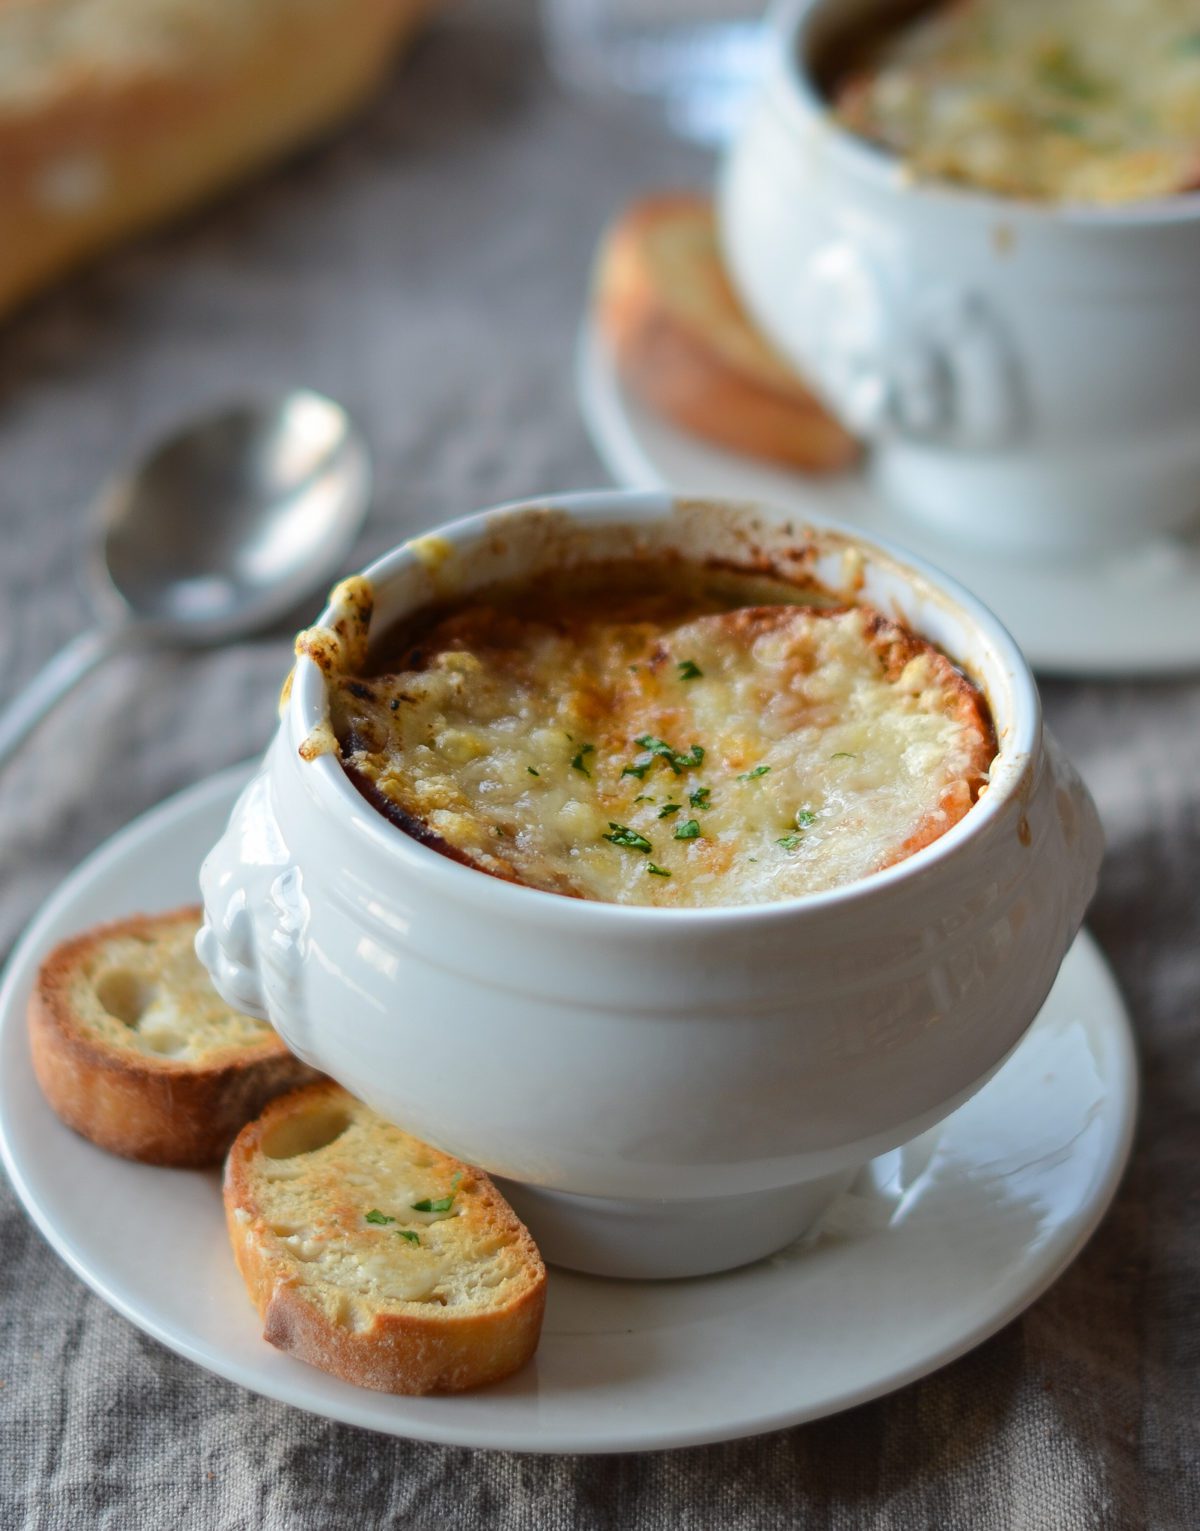 Onion soup for dinner at my mums tomorrow, one of you lot inspired me! :  r/slowcooking